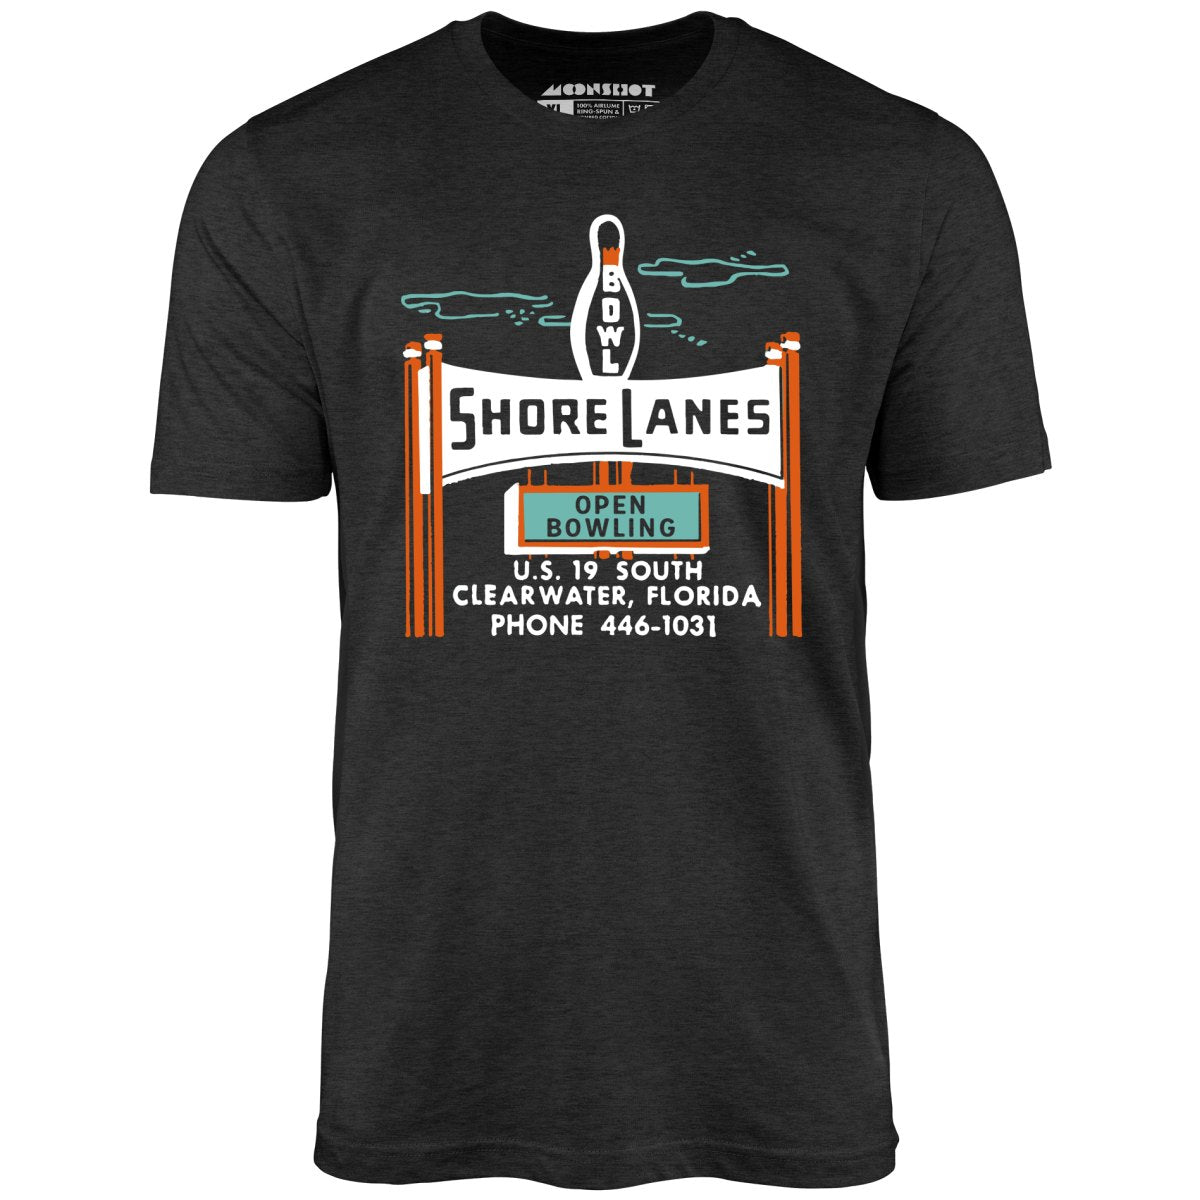 Shore Lanes - Clearwater, FL - Vintage Bowling Alley - Unisex T-Shirt